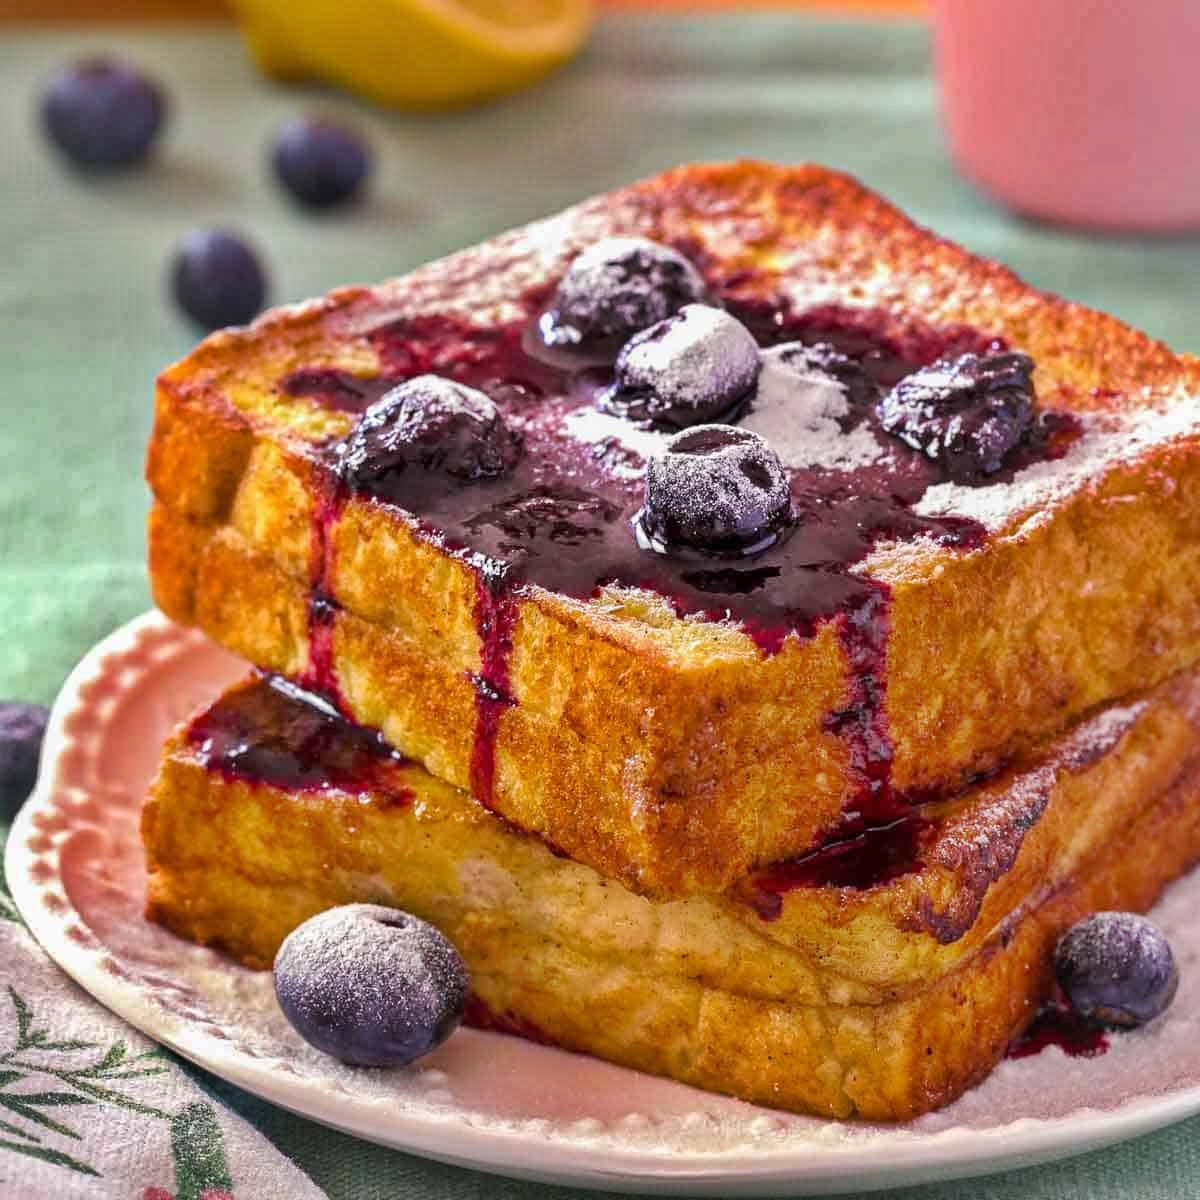 fancify-your-french-toast-with-lemon-ricotta-and-blackberry-compote